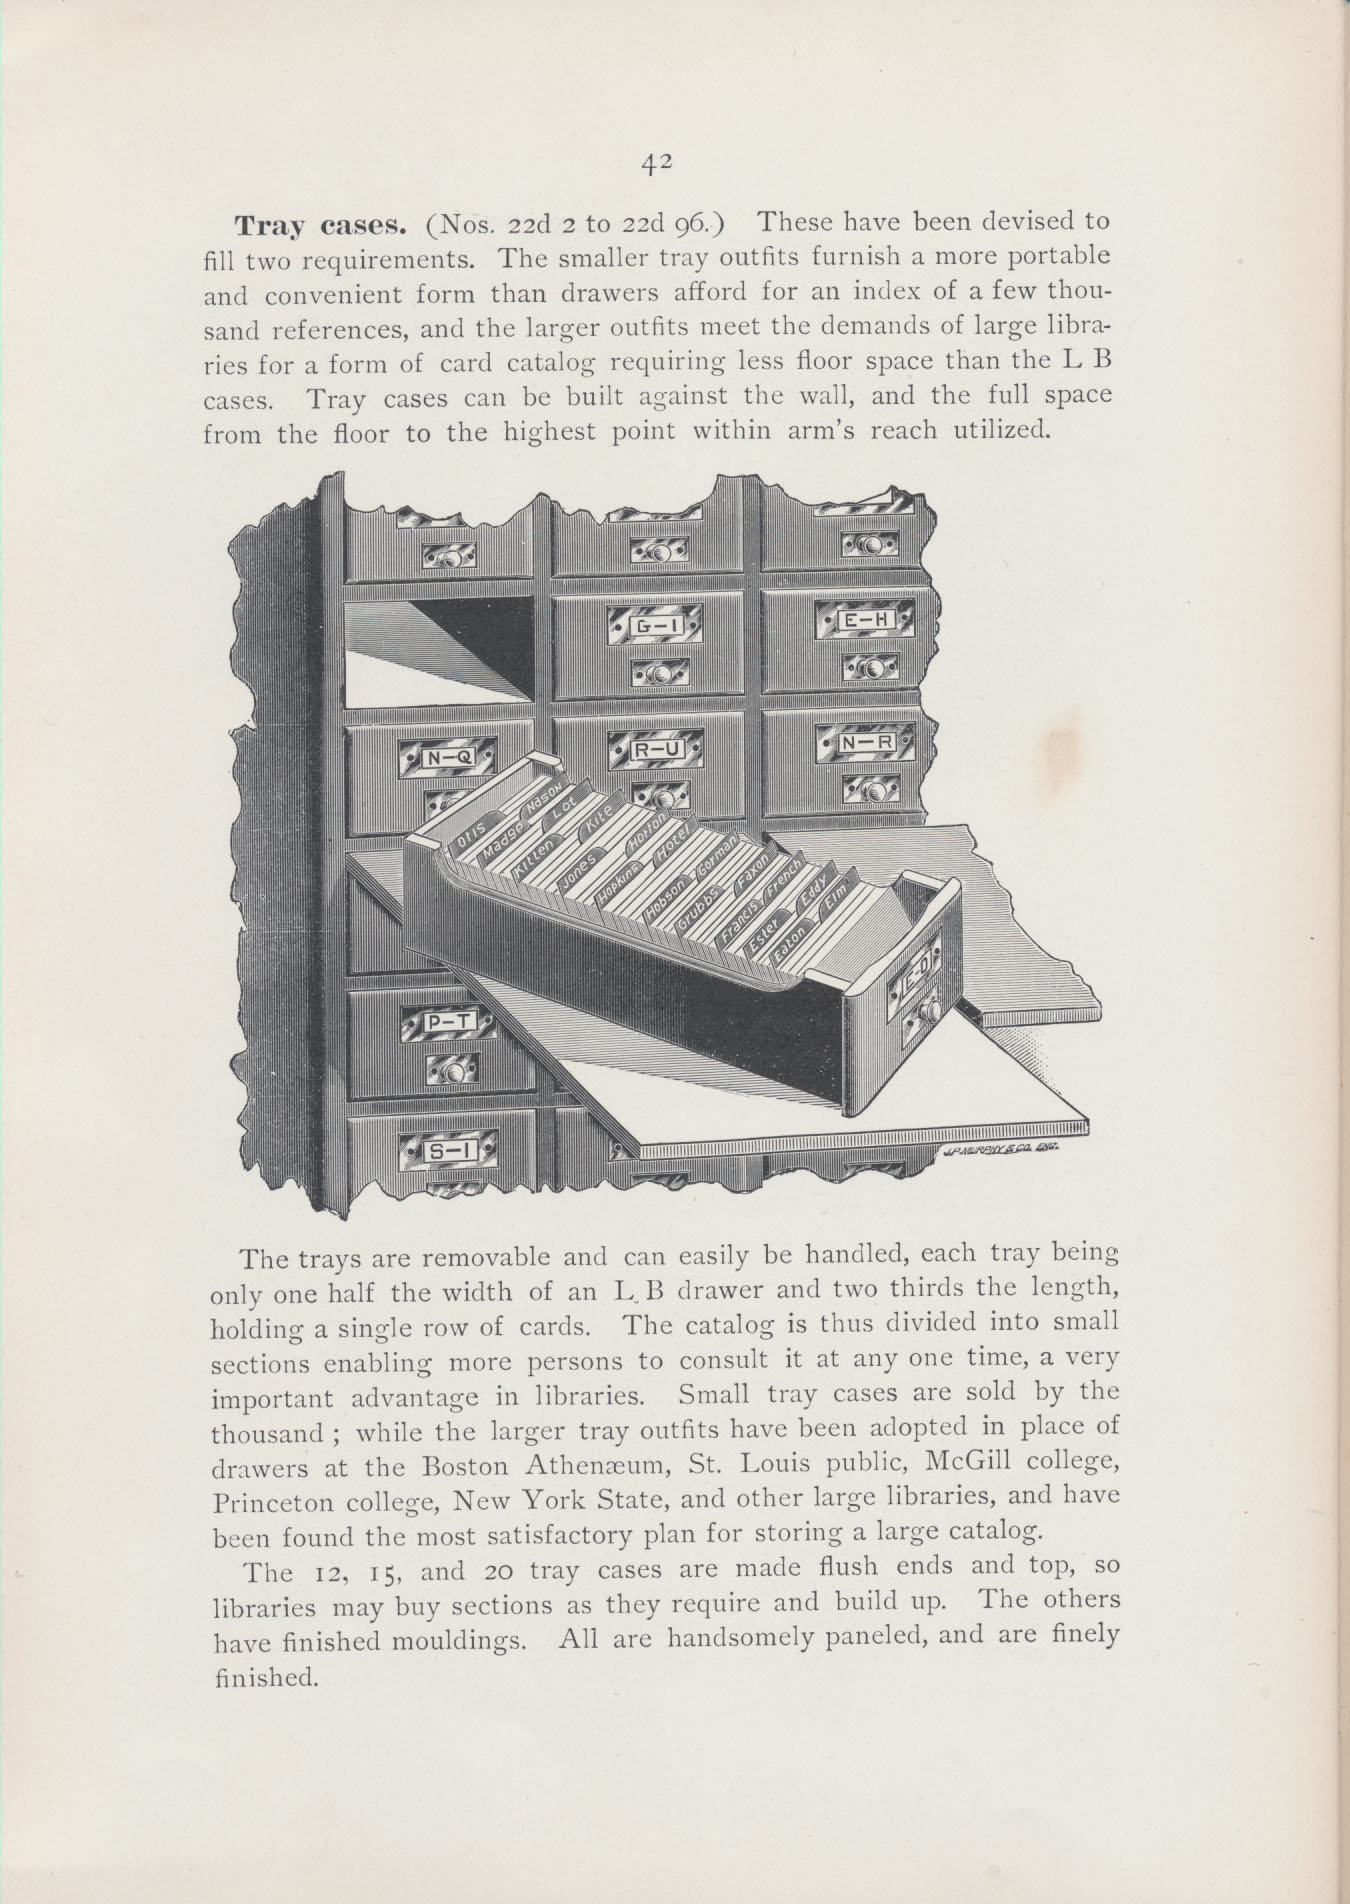 portion of card catalog showing tray removed from card catalog and resting on a slide